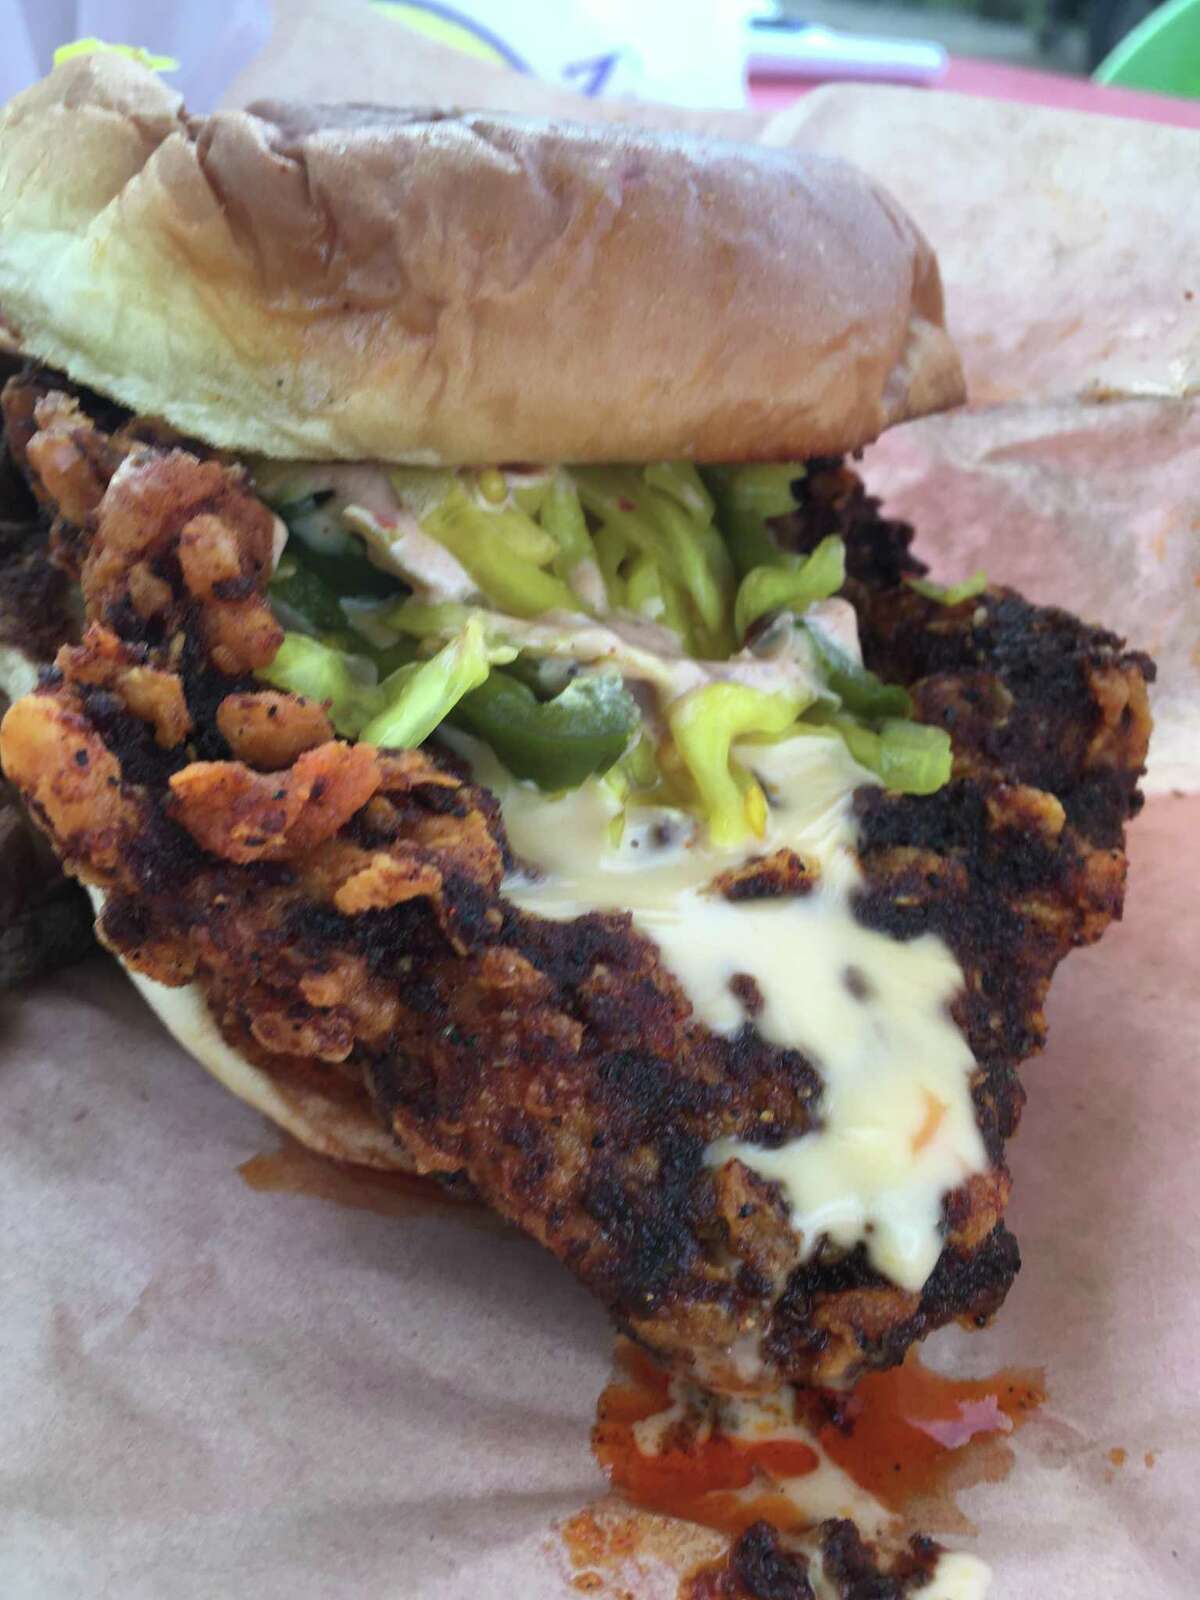 The Southern hot chicken sandwich at Pete's Chicken Shack